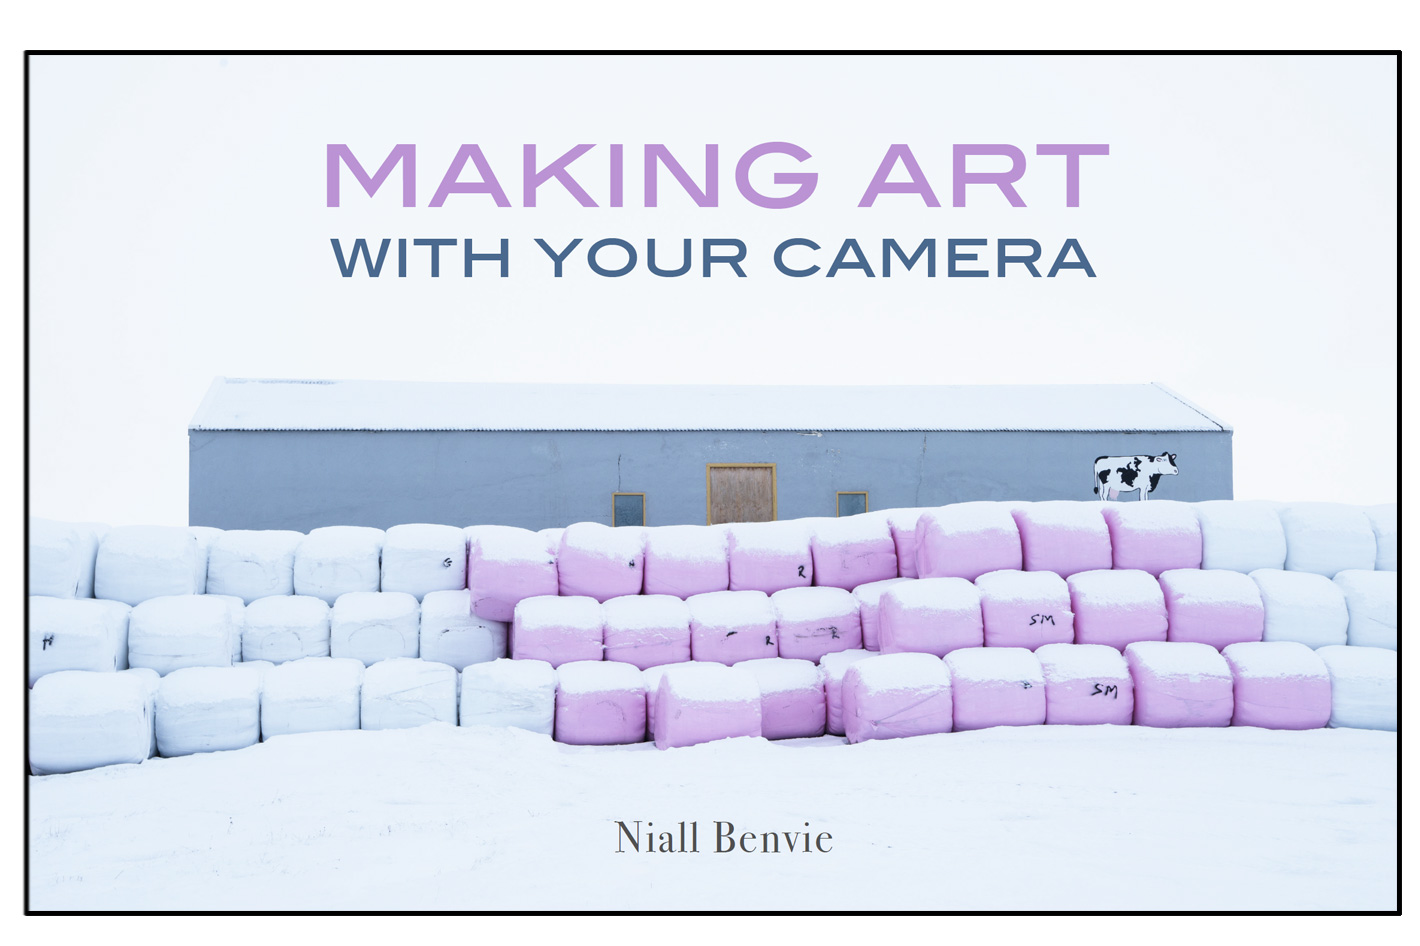 Niall Benvie: Making Art with your Camera